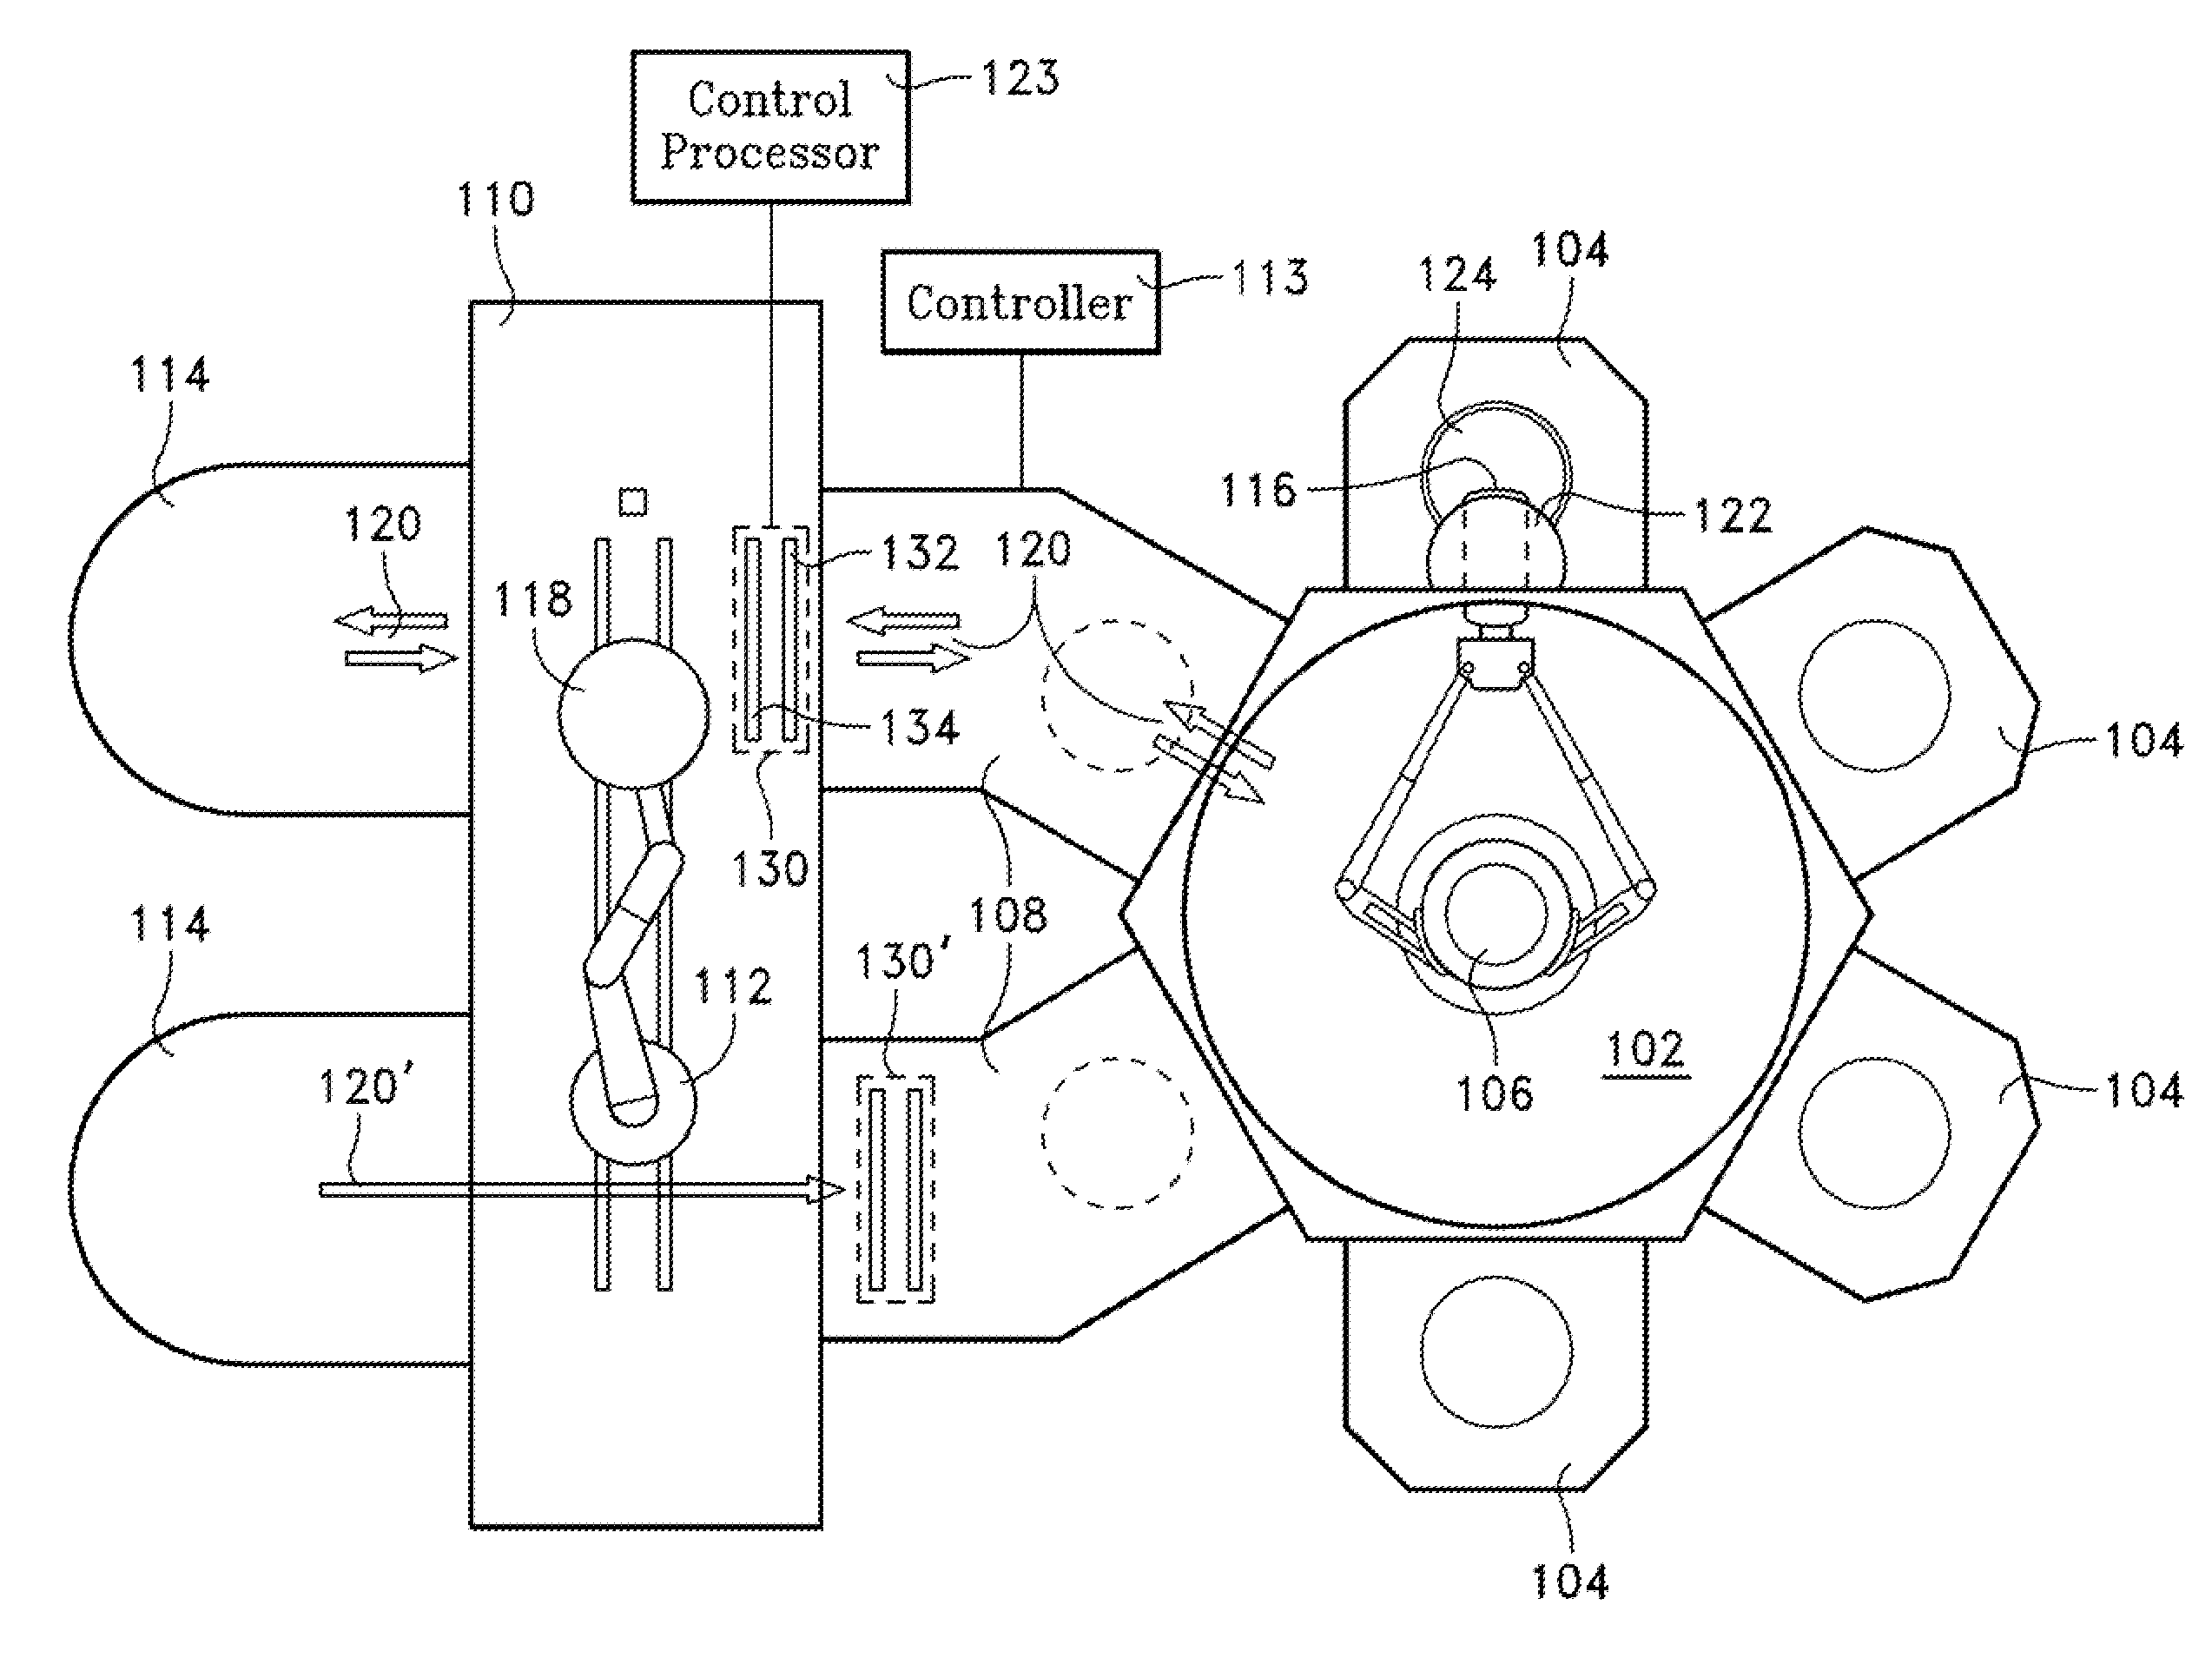 Method for imaging workpiece surfaces at high robot transfer speeds with reduction or prevention of motion-induced distortion